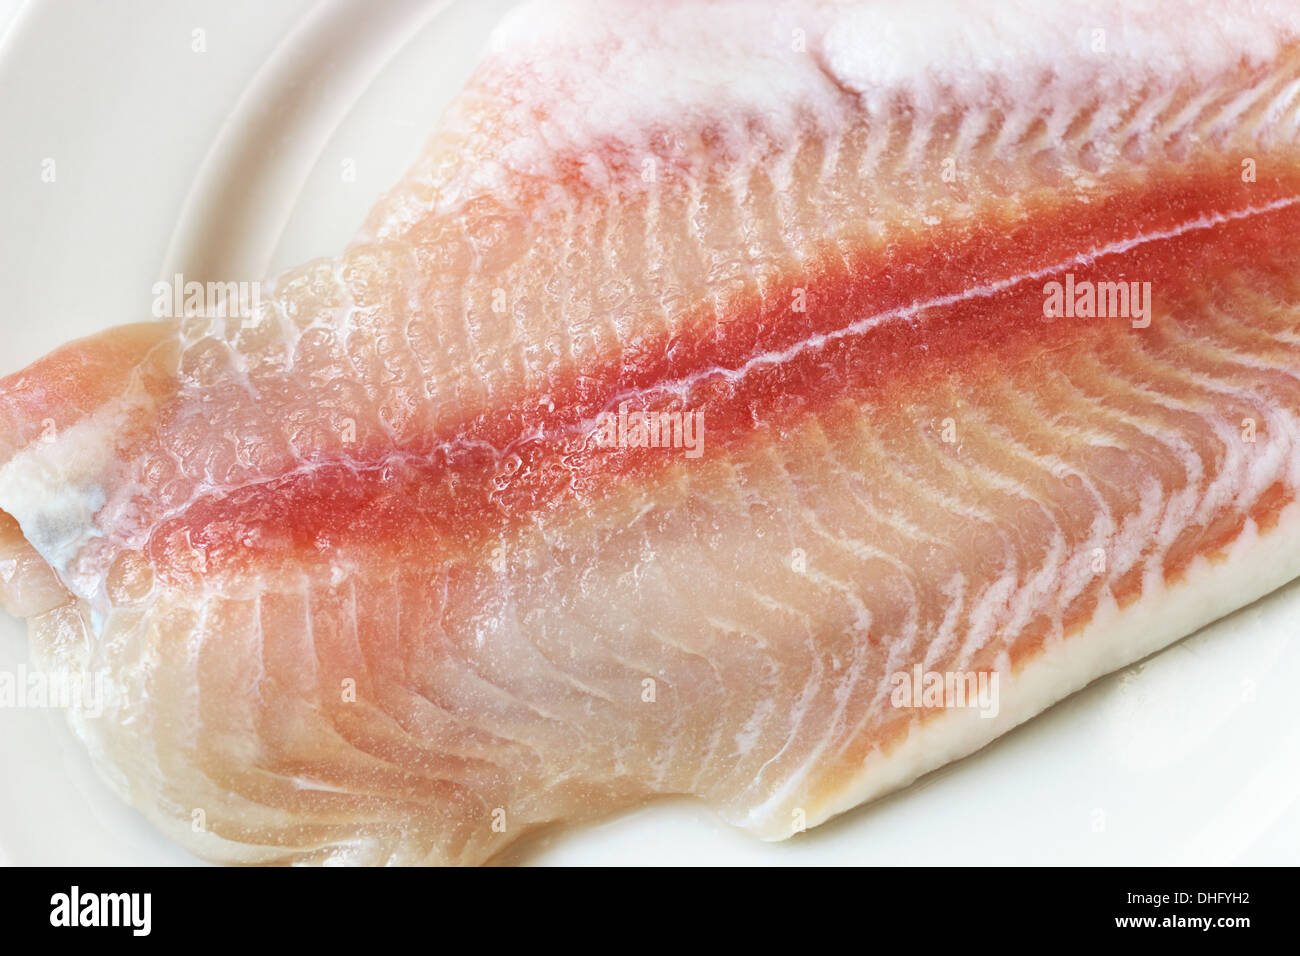 Raw fish fillet on porcelain Stock Photo